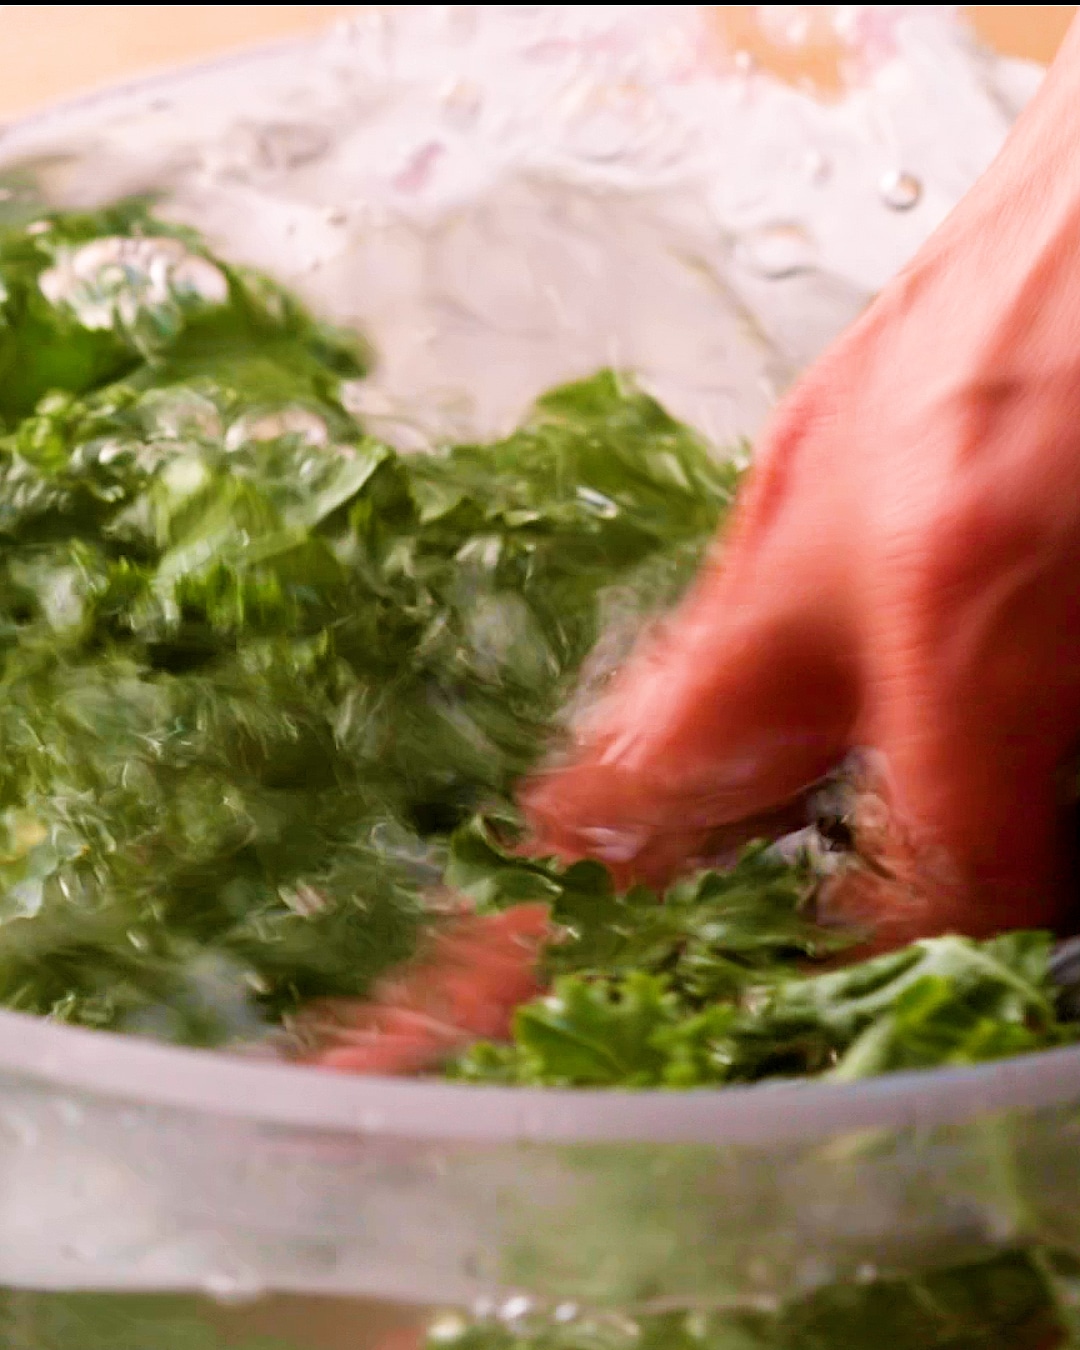 Giving kale leaves a good rinse in a bowl of water